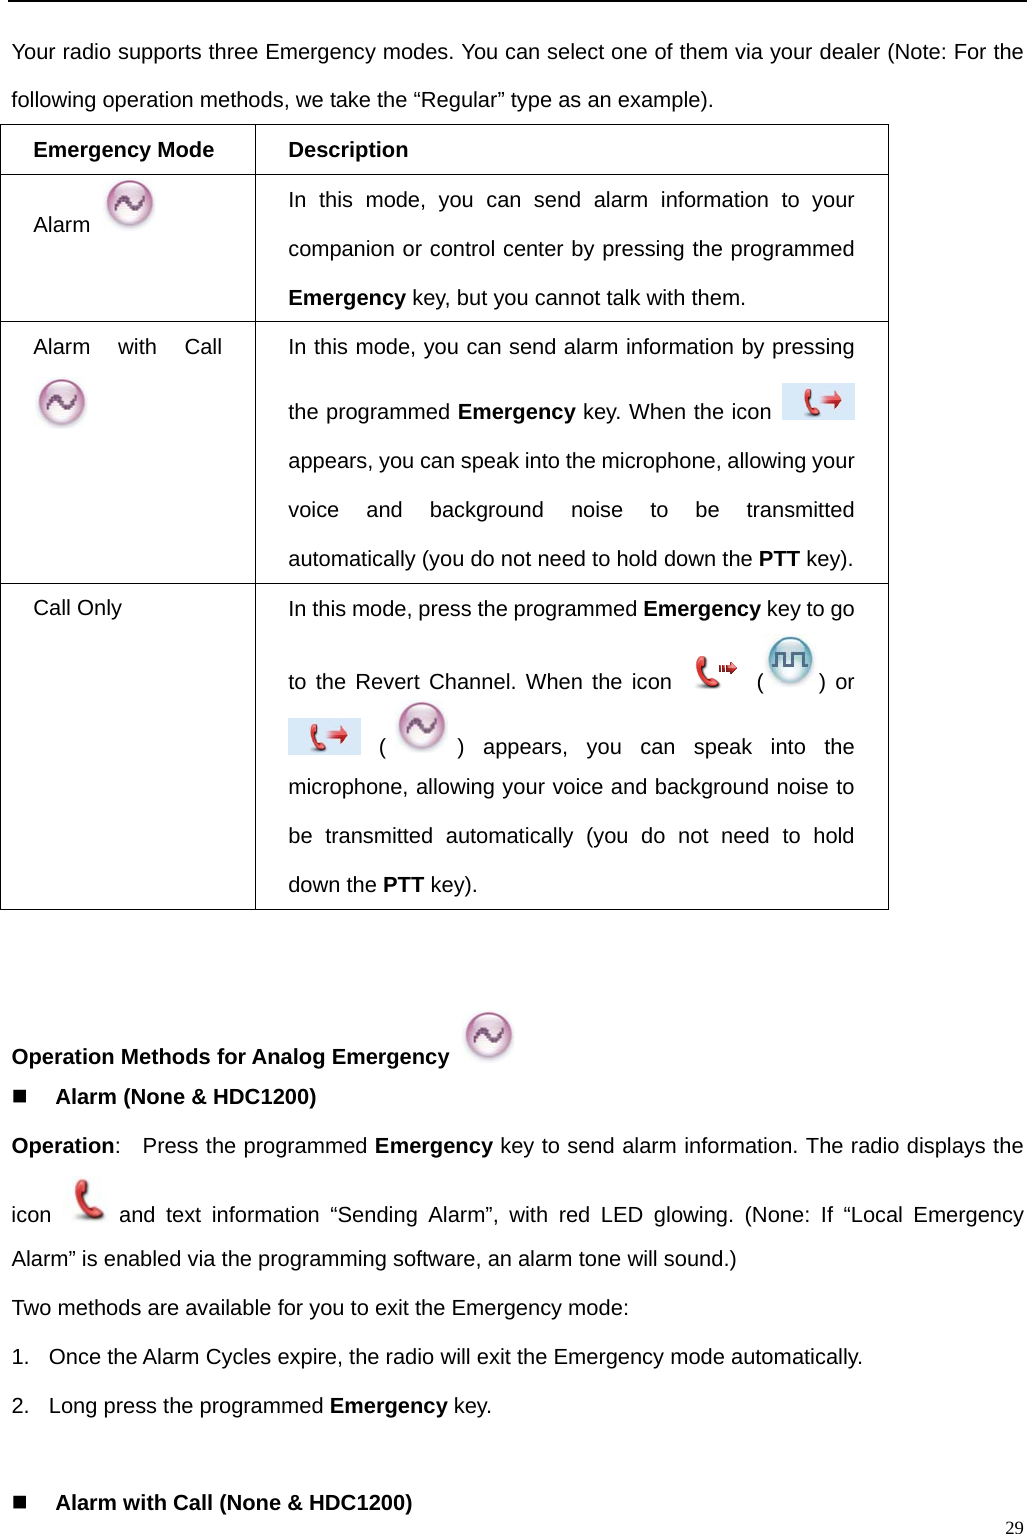                                                                                                            Your radio supports three Emergency modes. You can select one of them via your dealer (Note: For the following operation methods, we take the “Regular” type as an example). Emergency Mode Description Alarm   In this mode, you can send alarm information to your companion or control center by pressing the programmed Emergency key, but you cannot talk with them. Alarm with Call  In this mode, you can send alarm information by pressing the programmed Emergency key. When the icon   appears, you can speak into the microphone, allowing your voice and background noise to be transmitted automatically (you do not need to hold down the PTT key). Call Only In this mode, press the programmed Emergency key to go to the Revert Channel. When the icon   ( ) or  () appears, you can speak into the microphone, allowing your voice and background noise to be transmitted automatically (you do not need to hold down the PTT key).     Operation Methods for Analog Emergency   Alarm (None &amp; HDC1200) Operation:   Press the programmed Emergency key to send alarm information. The radio displays the icon   and text information “Sending Alarm”, with red LED glowing. (None: If “Local Emergency Alarm” is enabled via the programming software, an alarm tone will sound.) Two methods are available for you to exit the Emergency mode: 1.  Once the Alarm Cycles expire, the radio will exit the Emergency mode automatically.   2.  Long press the programmed Emergency key.    29 Alarm with Call (None &amp; HDC1200) 